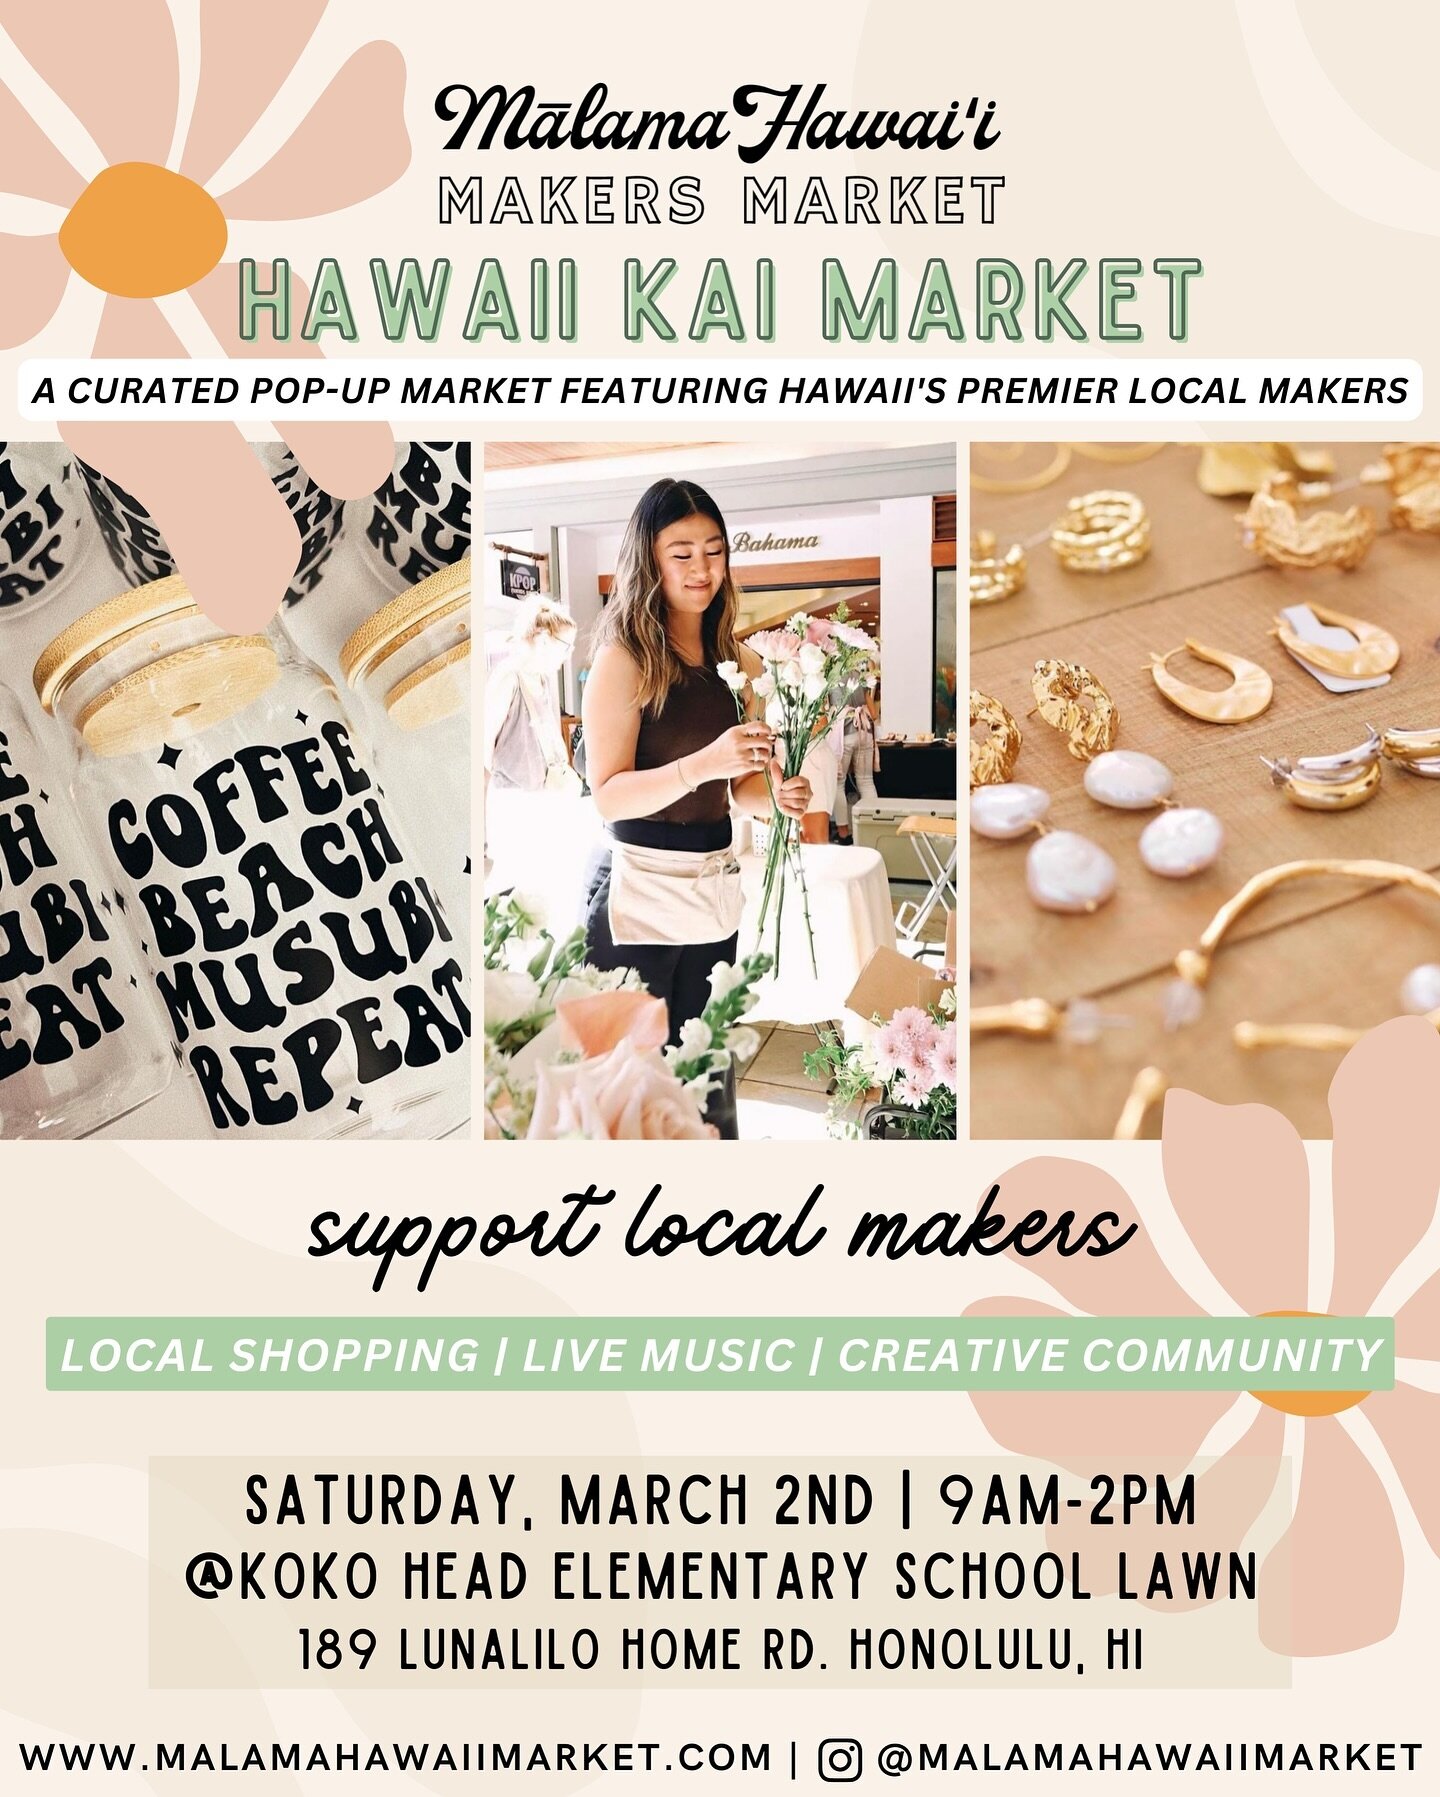 Our first market of the 🌷Spring Season 🌷 only one week away!

Join us on Saturday, March 2nd at Koko Head Elementary School Lawn to shop + support nearly 50 local makers showcasing unique and one of a kind goods! 🌞

From etched glassware by @her.a